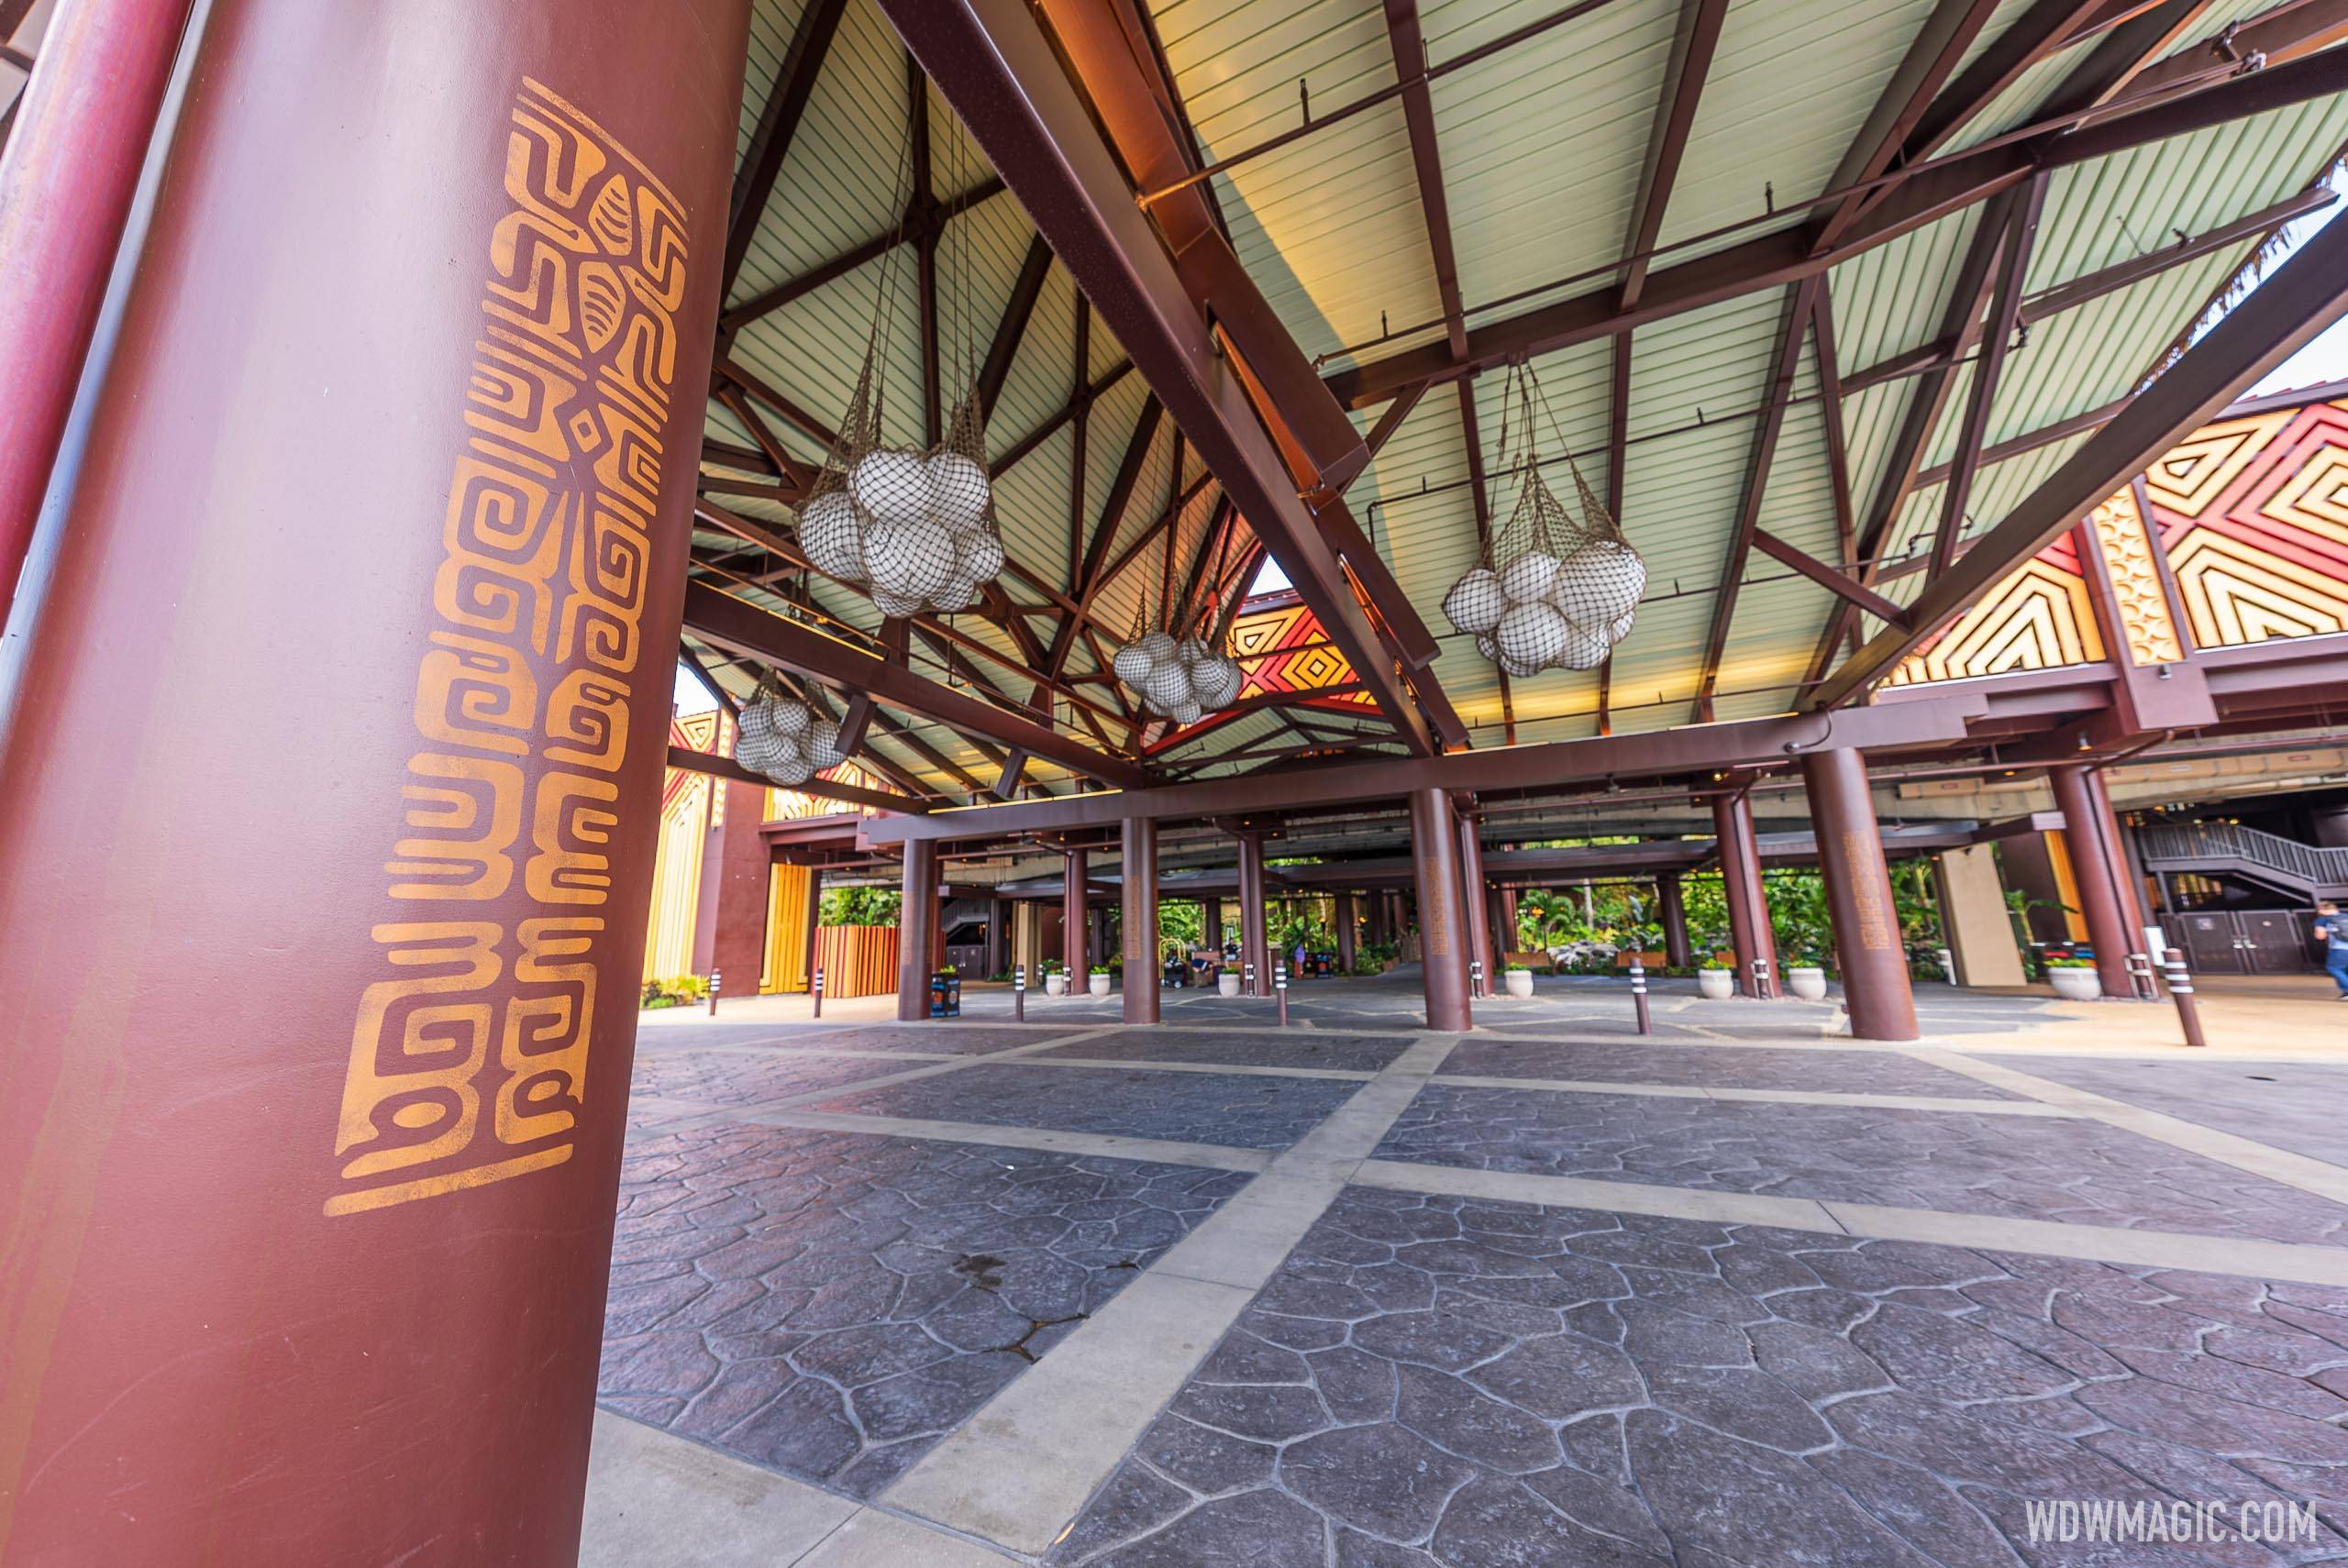 New details added to Porte Cochere entrance area